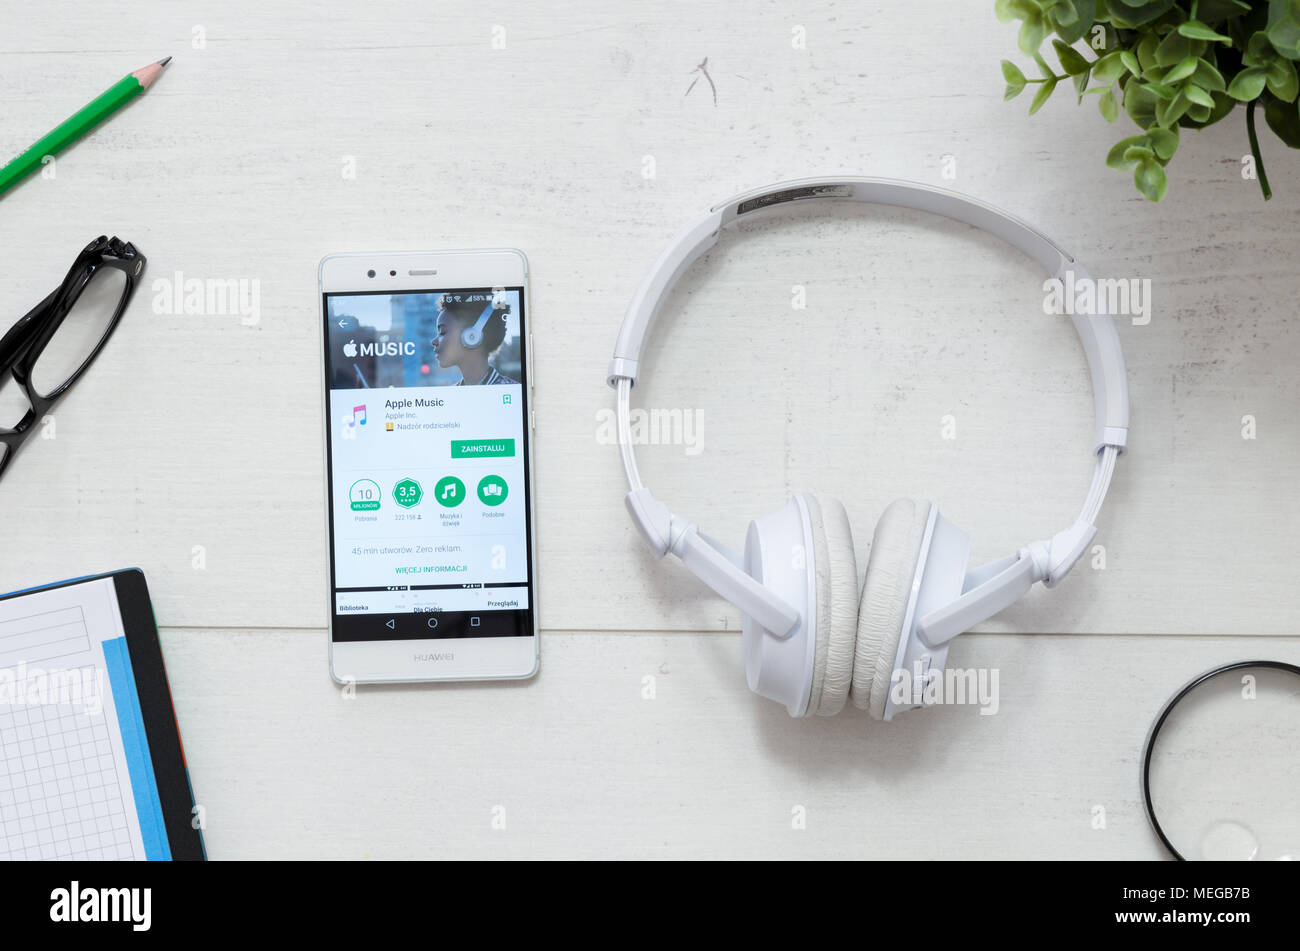 WROCLAW, POLAND - MARCH 29, 2018: Apple Music is a service that offers legal streaming music. Smartphone with Apple Music app in Google Play store on  Stock Photo